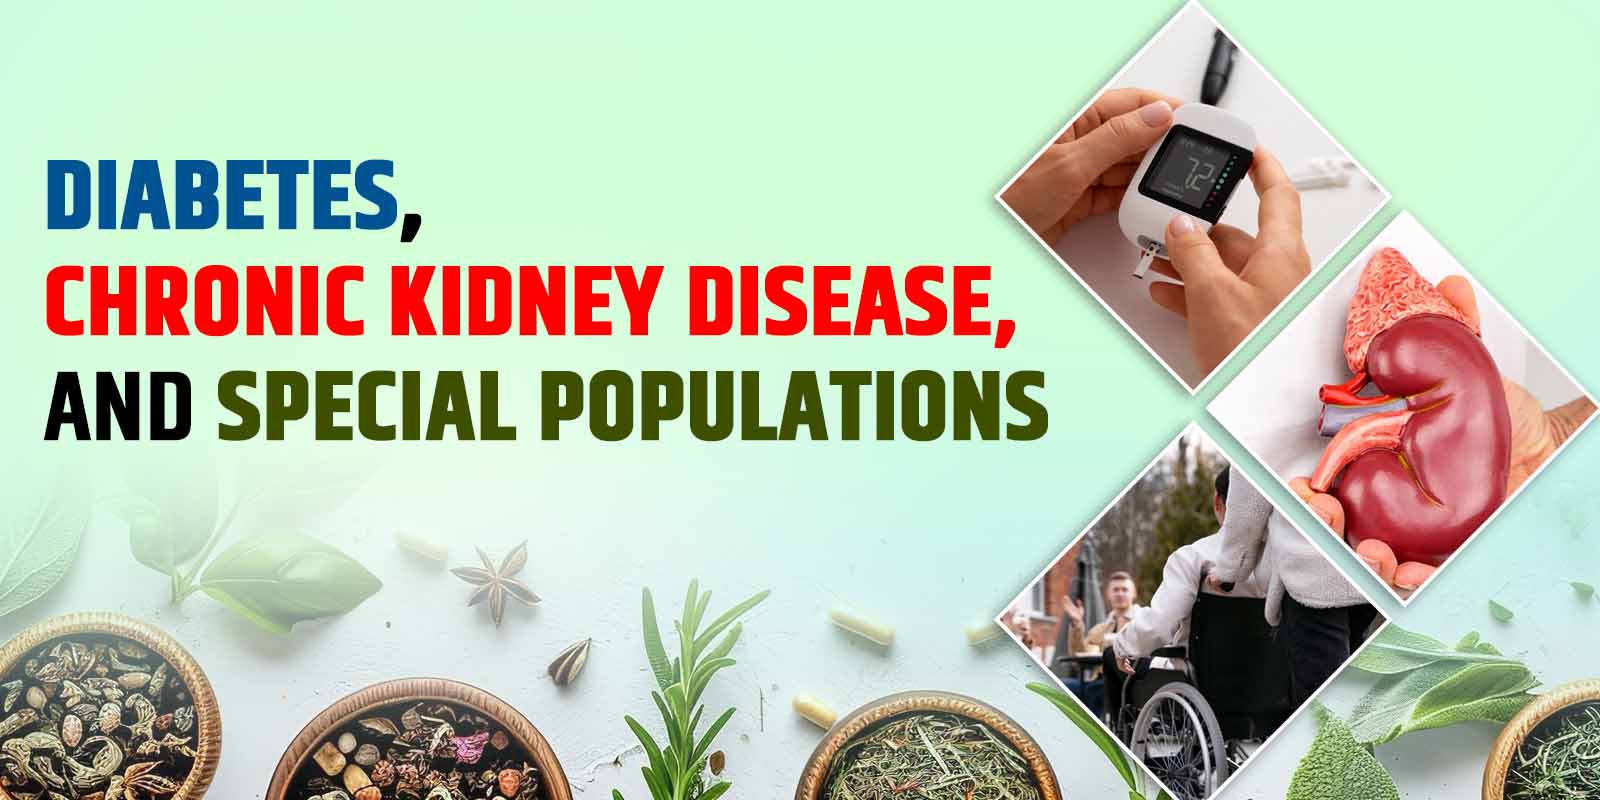 Diabetes, Chronic Kidney Disease, and Special Populations